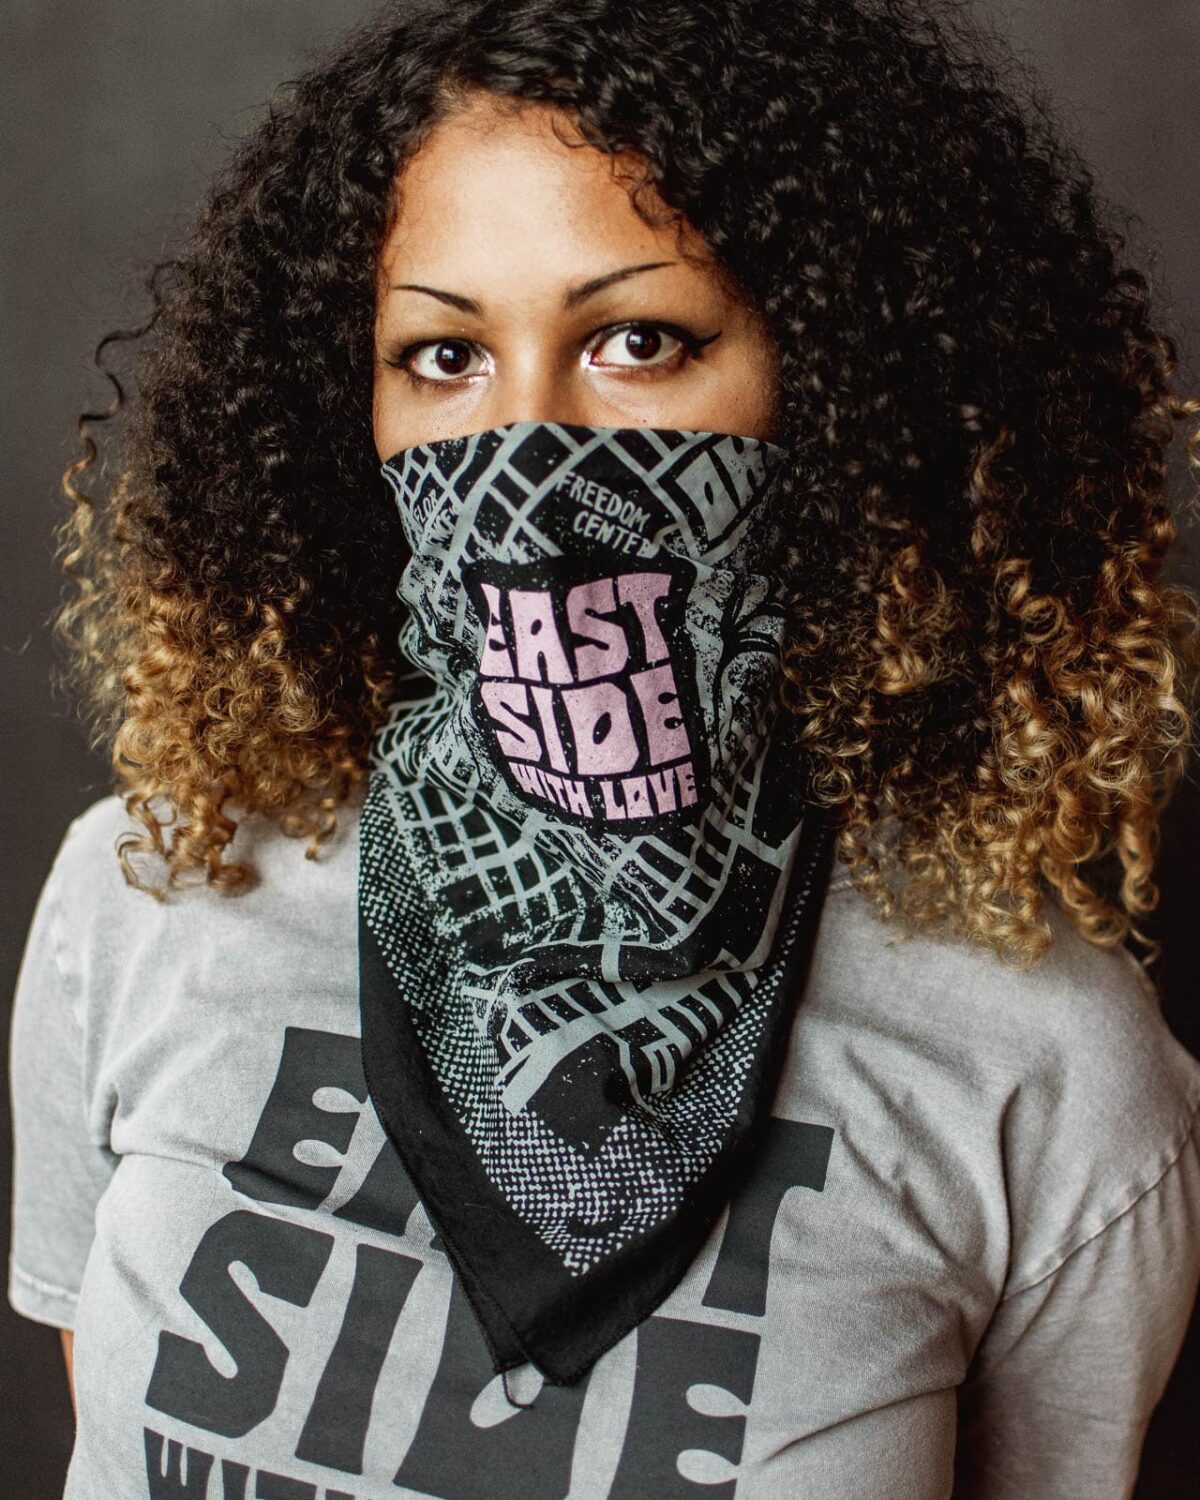 Hand printed custom bandana for Jabee's East Side collection.